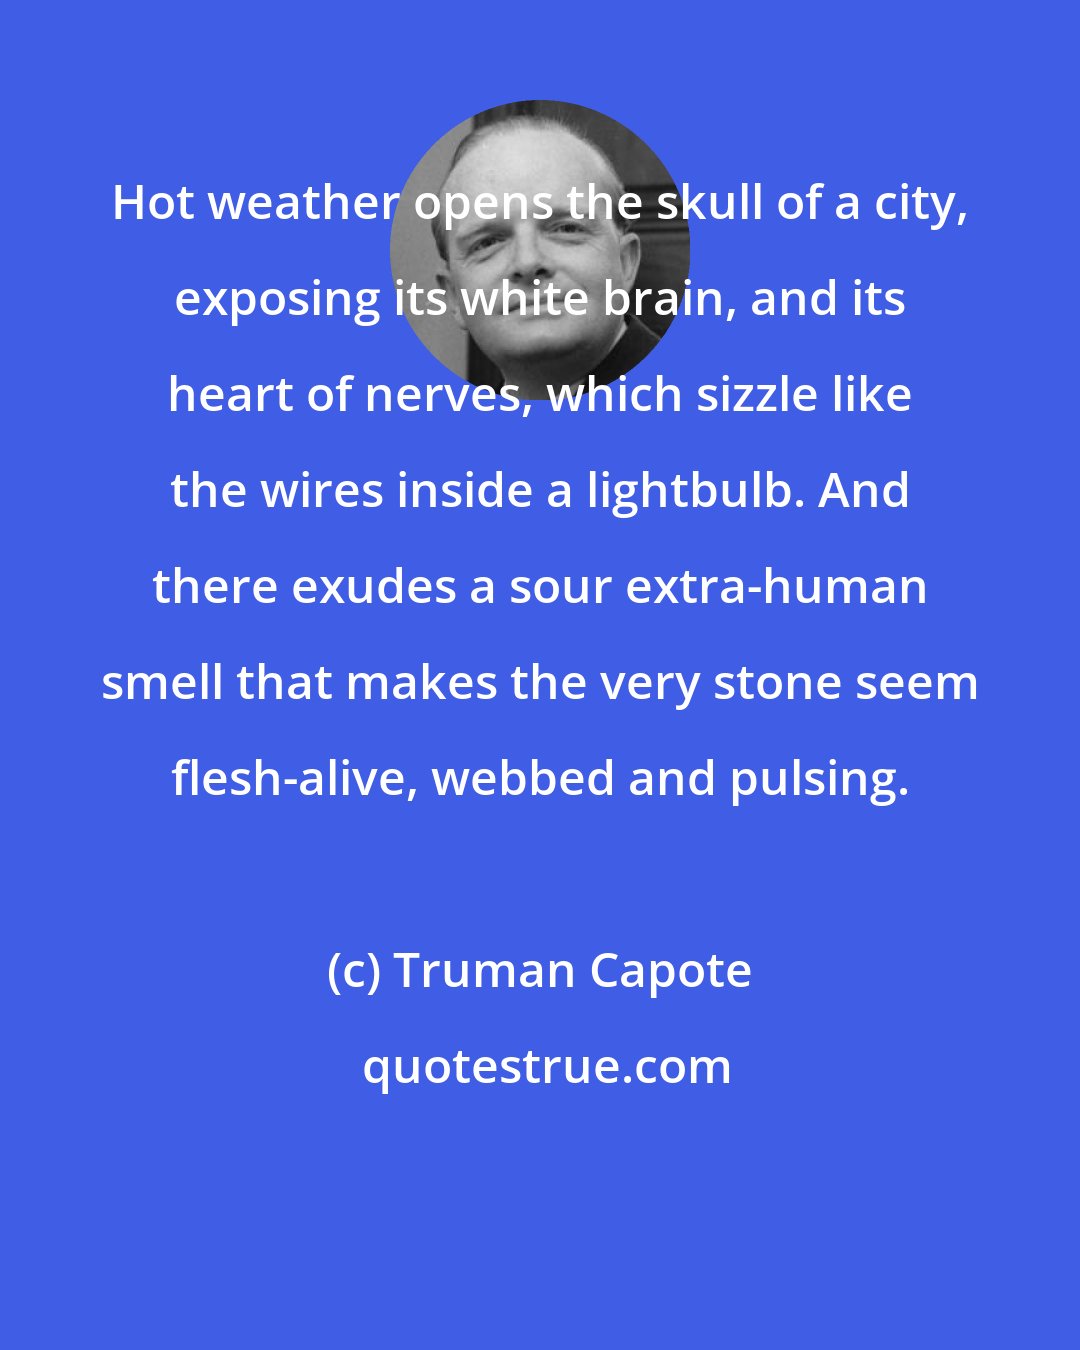 Truman Capote: Hot weather opens the skull of a city, exposing its white brain, and its heart of nerves, which sizzle like the wires inside a lightbulb. And there exudes a sour extra-human smell that makes the very stone seem flesh-alive, webbed and pulsing.